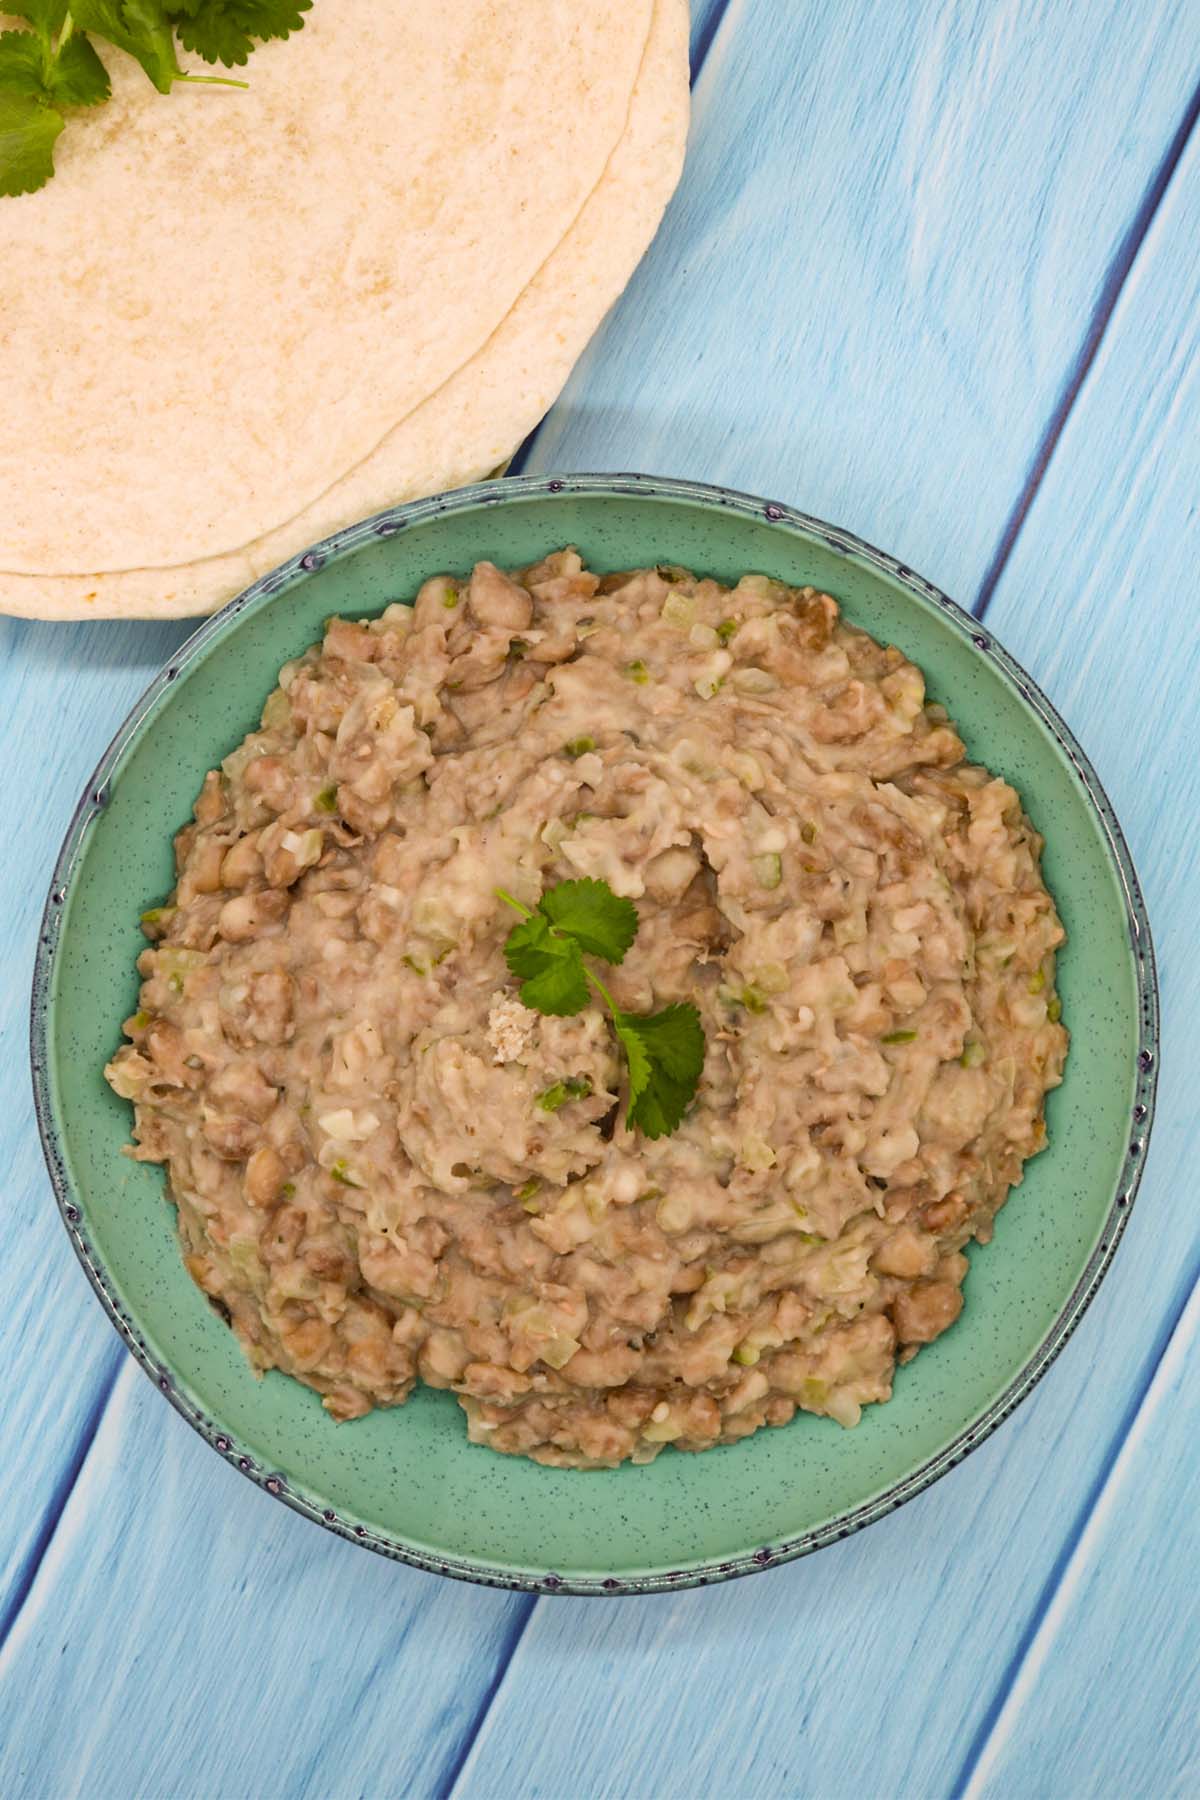 Refried bean in green bowl with flour tortillas in background